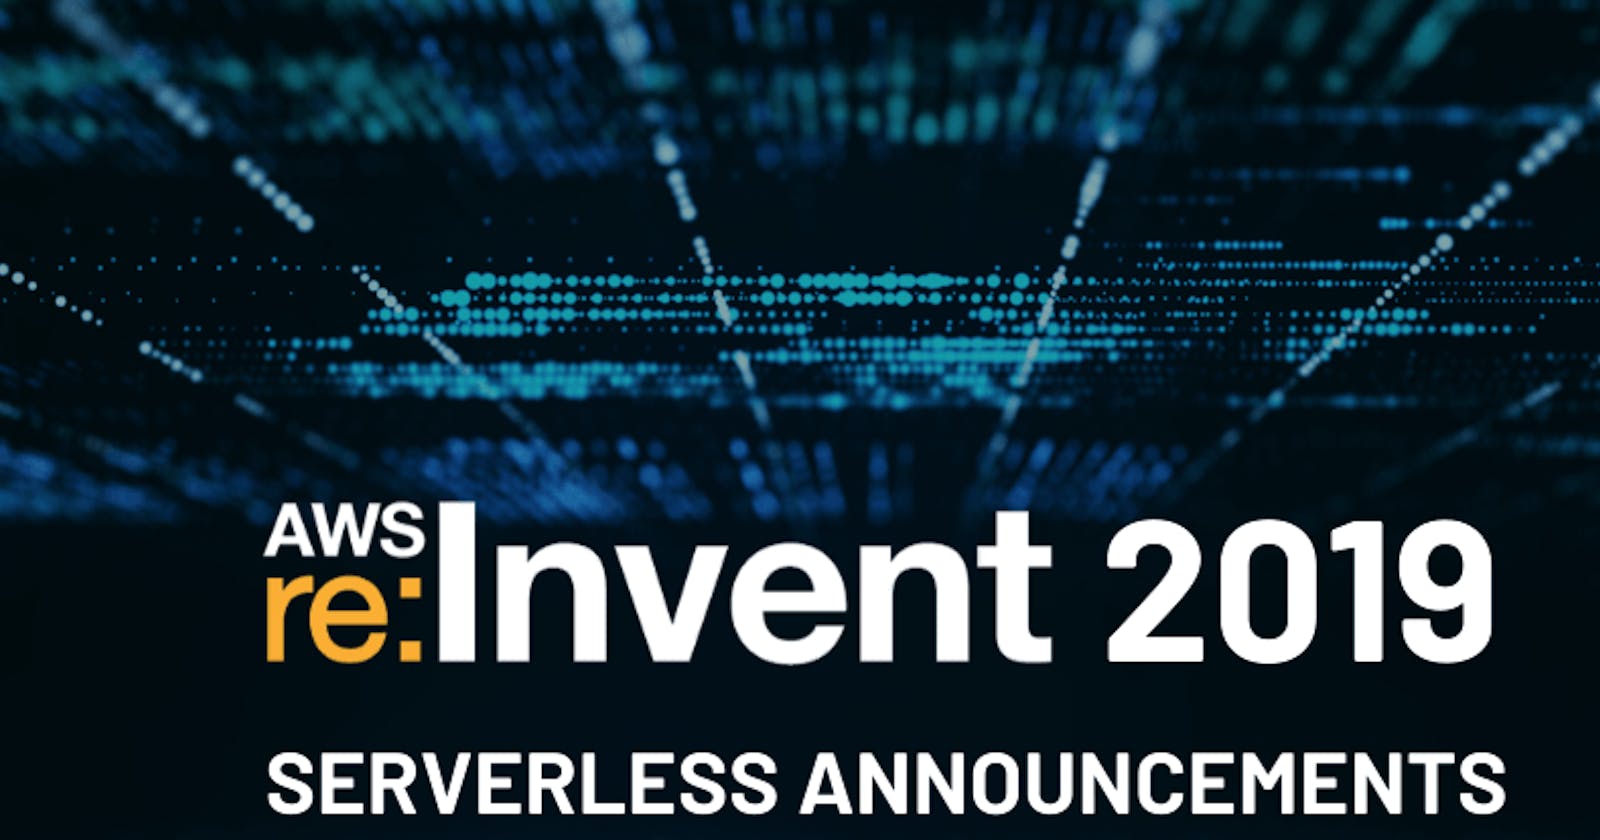 Key Serverless Announcements at re:Invent 2019